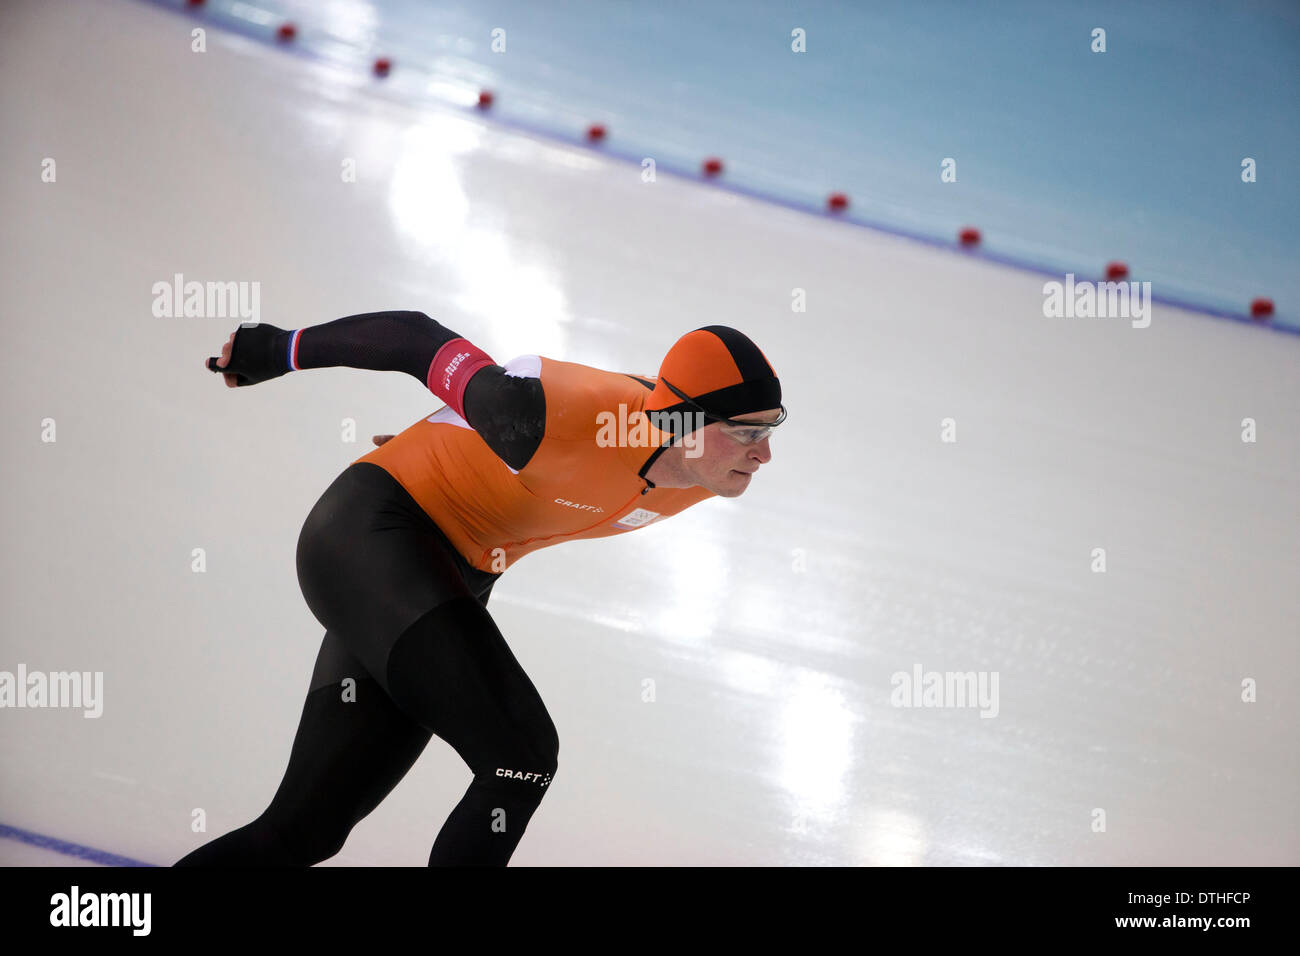 Sochi, Russia. 18th Feb, 2014. Sven Kramer of the Netherlands wins the silver medal in the Men's 10000M Speed Skating at the Alder Arena Skating Center during the Sochi 2014 Winter Olympic in Sochi, Russia. Credit:  Paul Kitagaki Jr./ZUMAPRESS.com/Alamy Live News Stock Photo